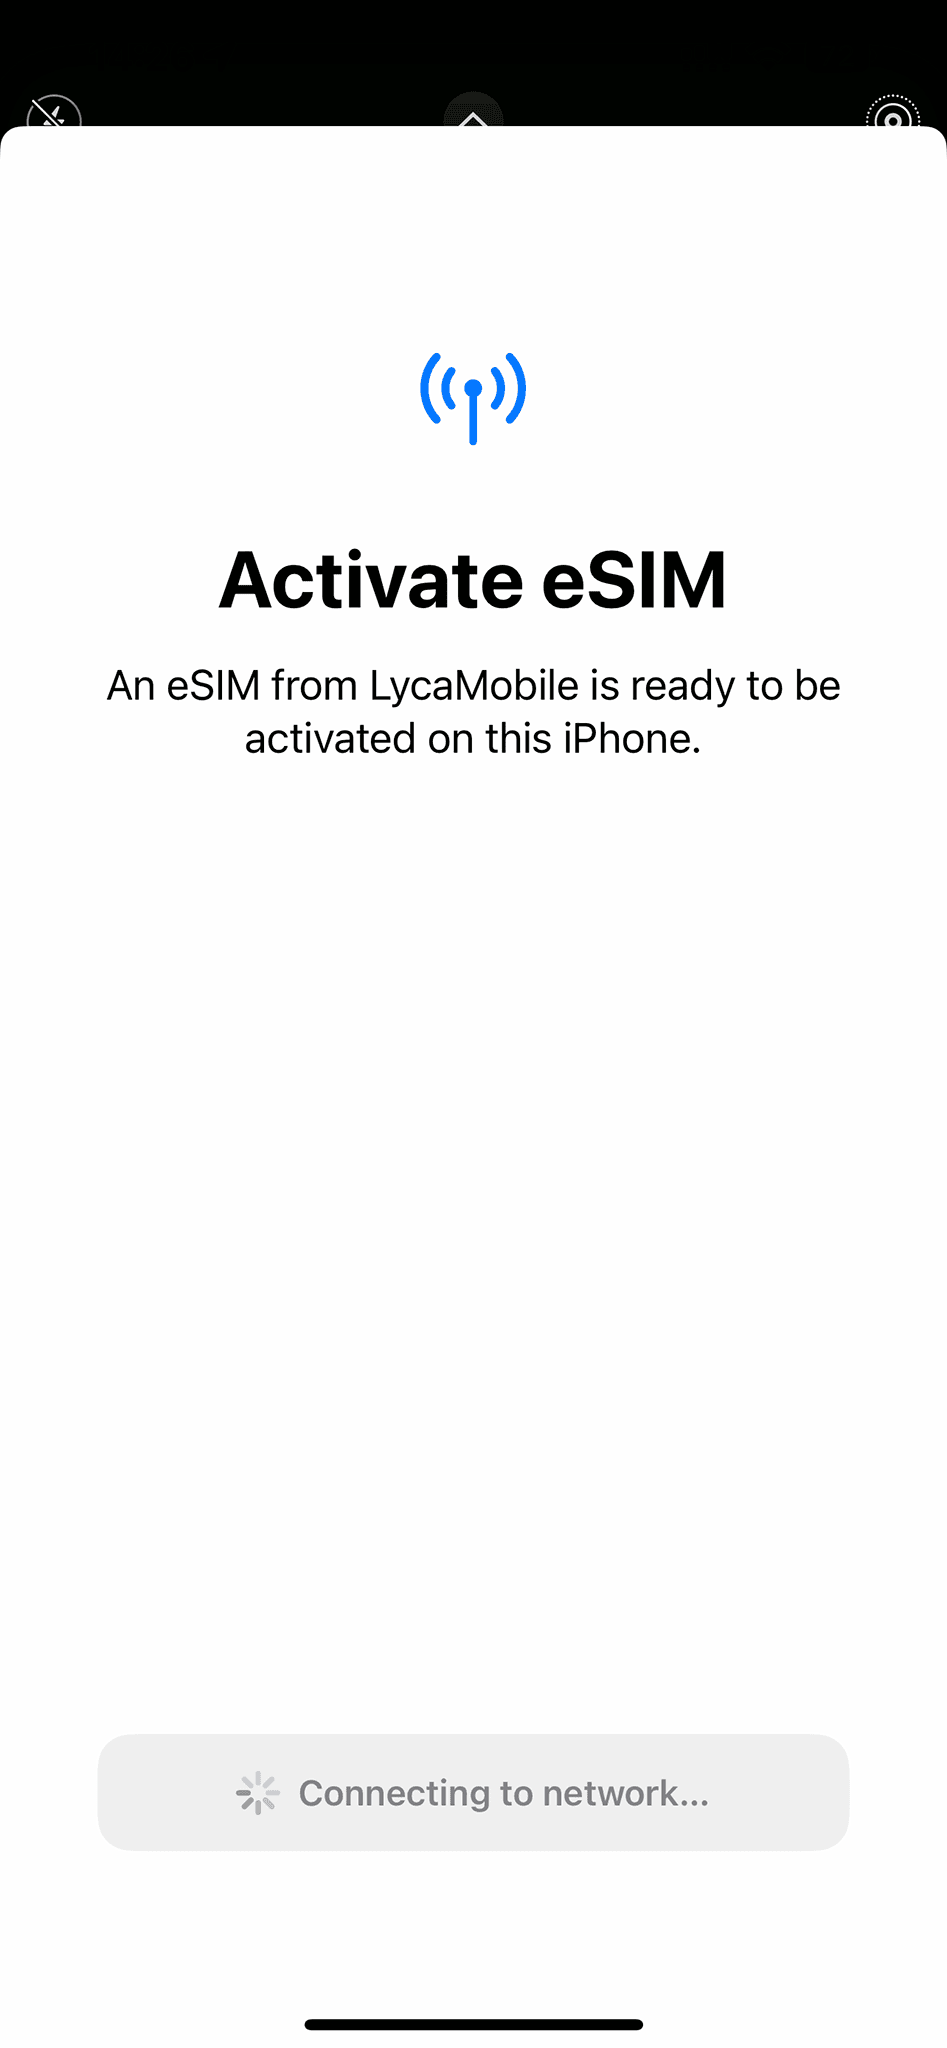 Connecting to network during activation of eSIM on Lyca Mobile